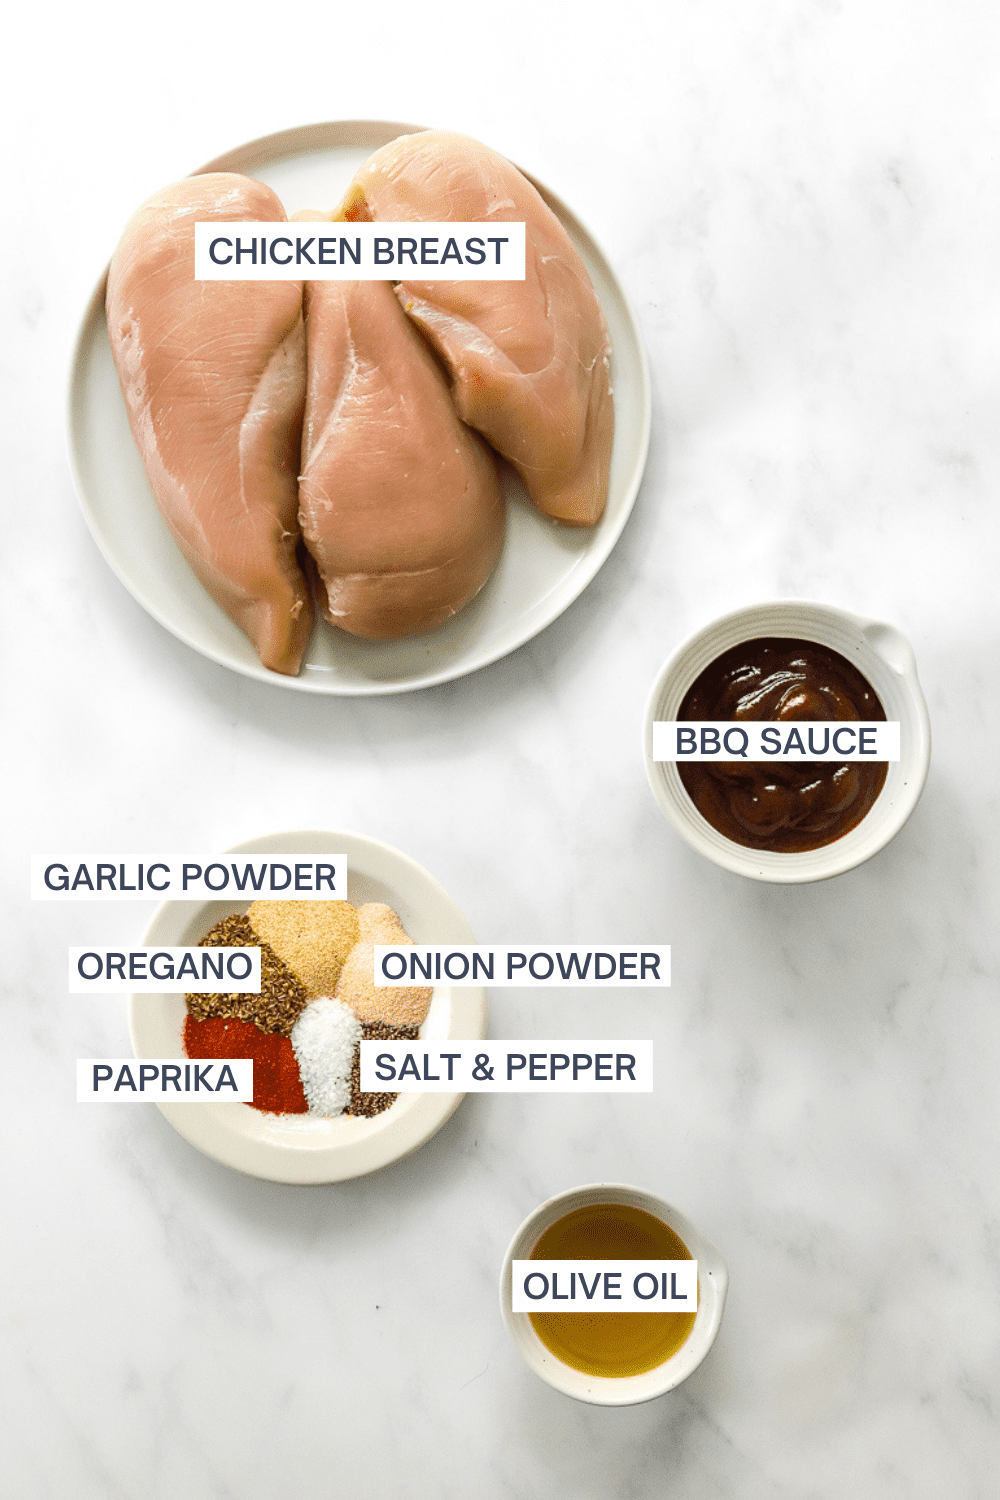 3 raw chicken breasts on a plate with a bowl of bbq sauce, a plate of spices and a small bowl of olive oil in front of it with labels for each ingredient.